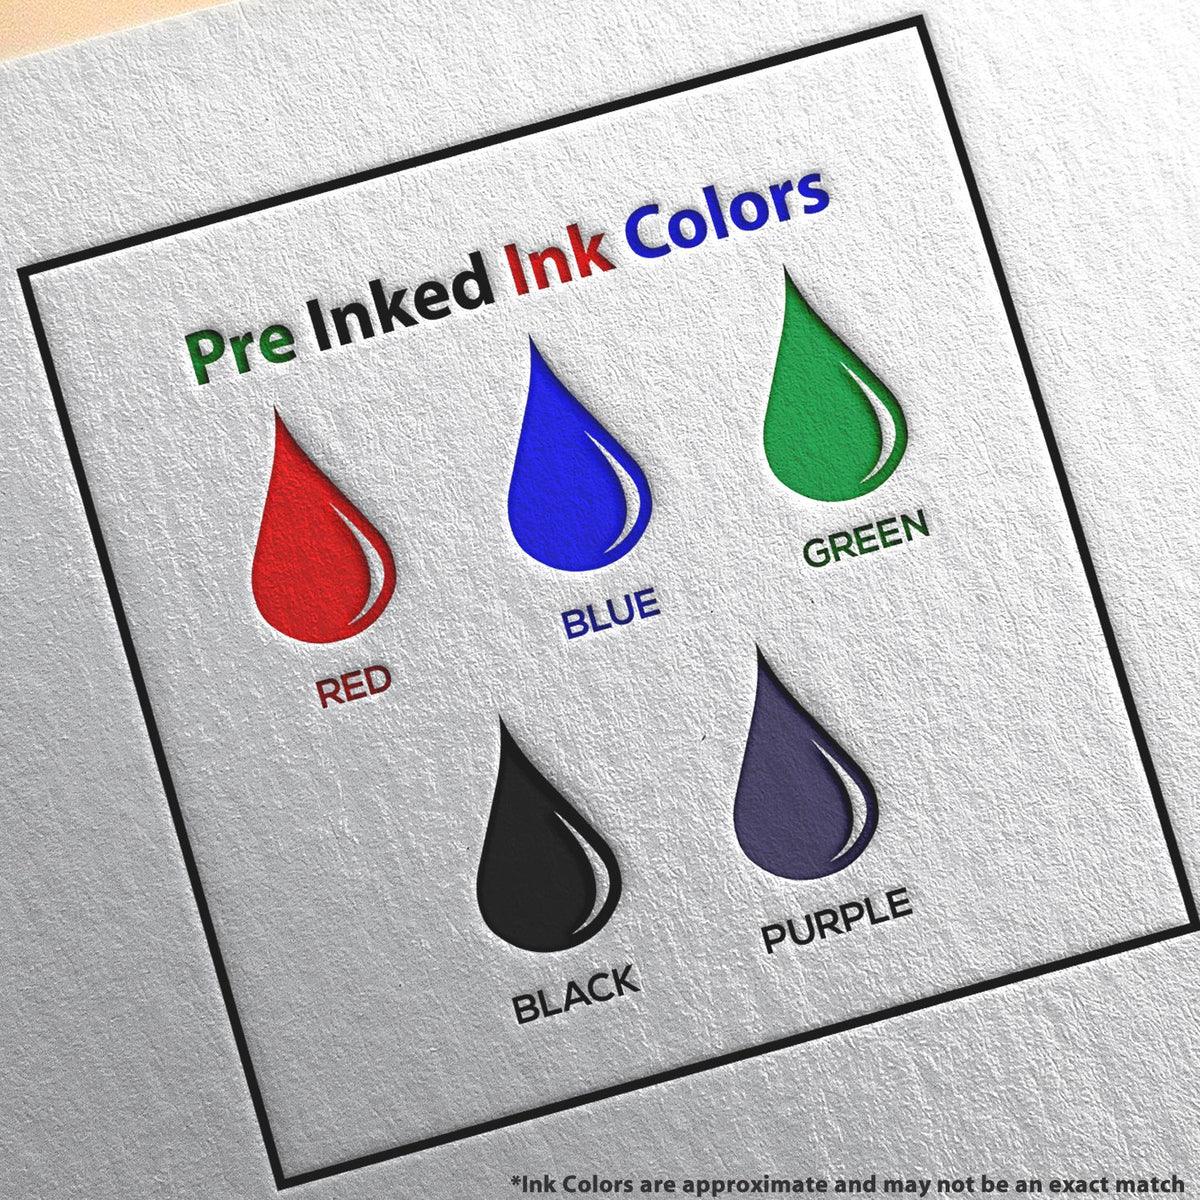 A picture showing the different ink colors or hues available for the Slim Pre-Inked Tennessee Professional Engineer Seal Stamp product.